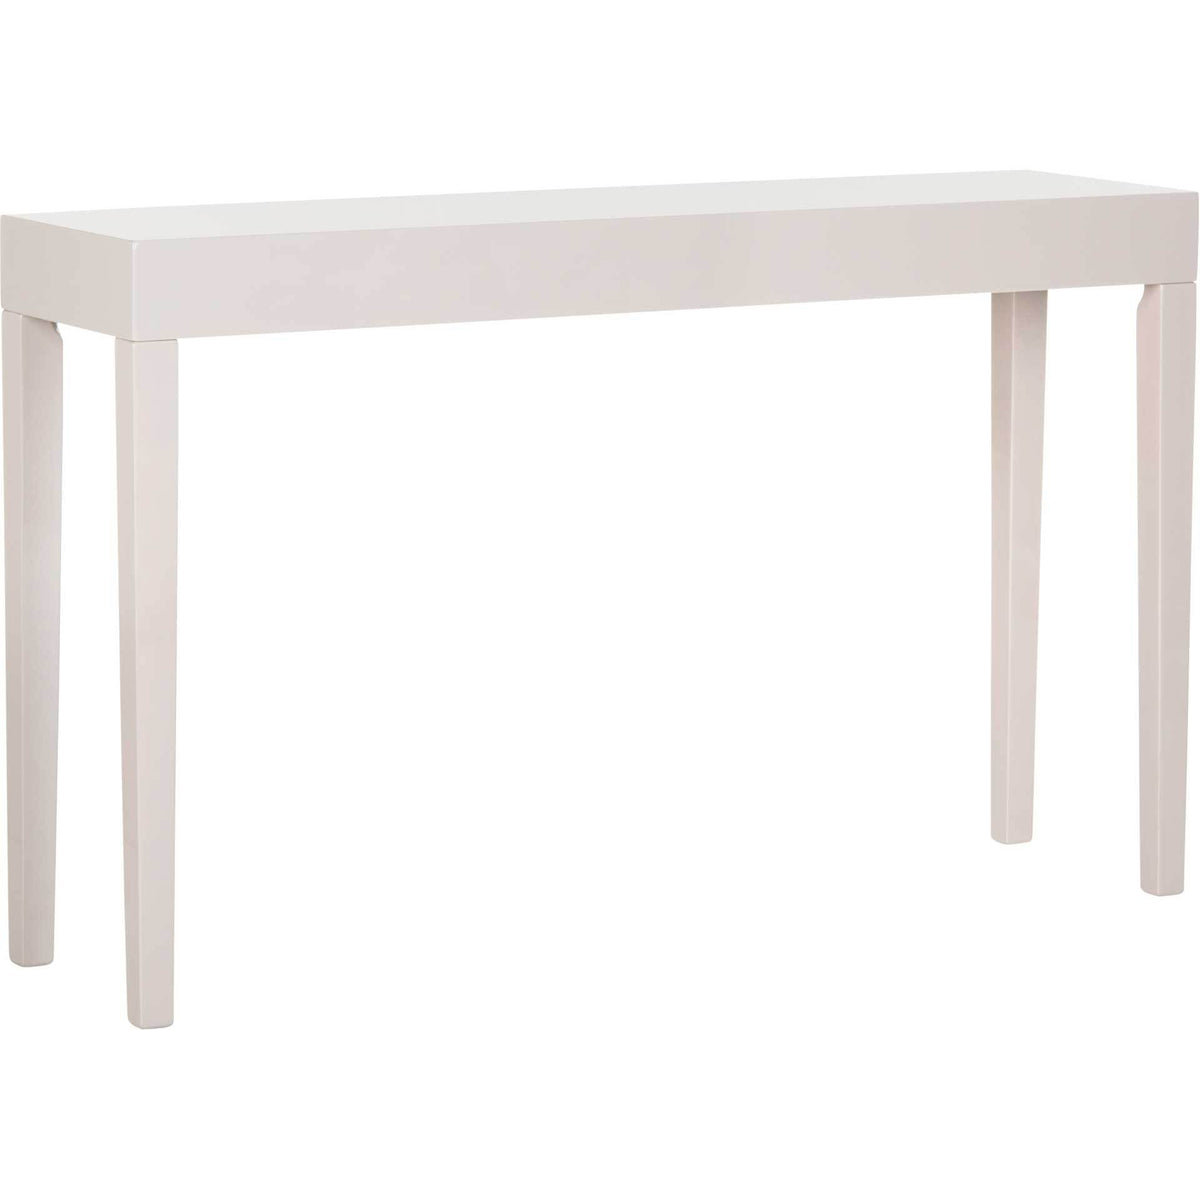 Kasey Lacquer Console Table Gray